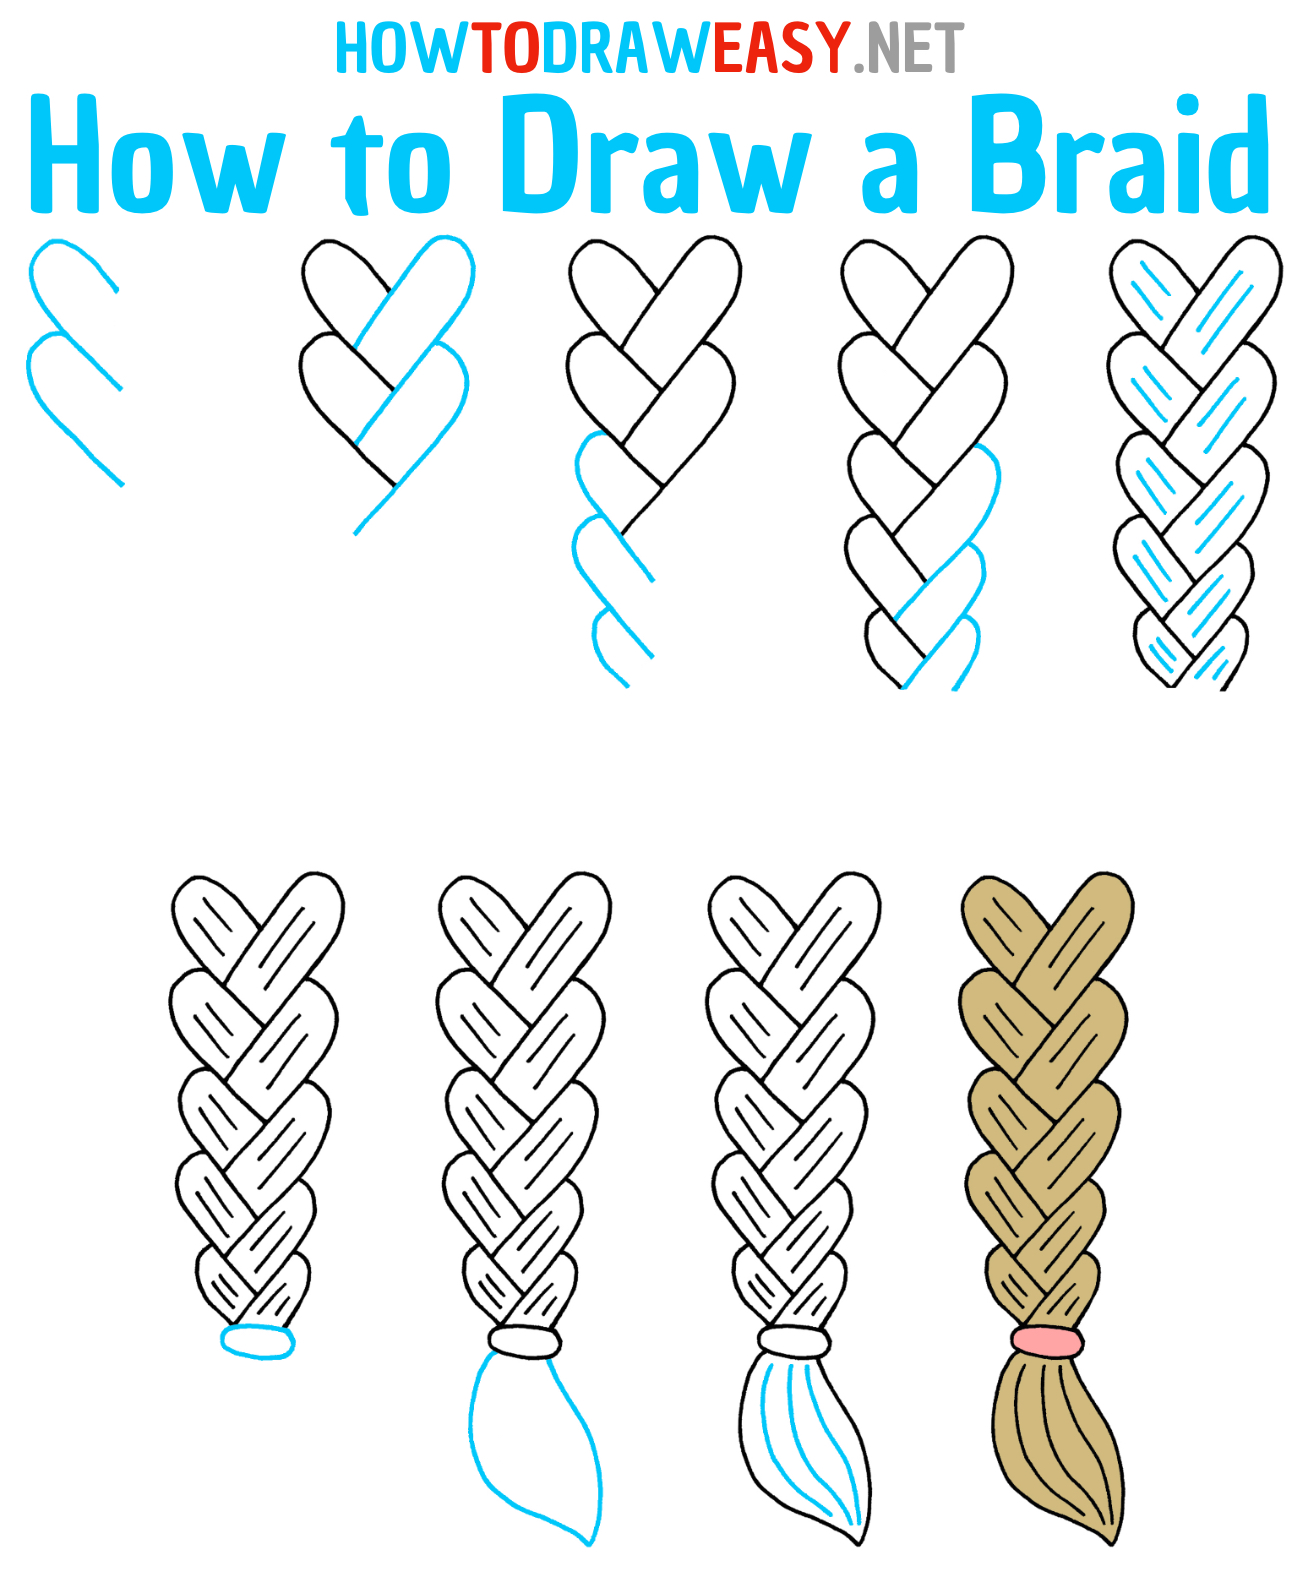 How to Draw a Braid Step by Step